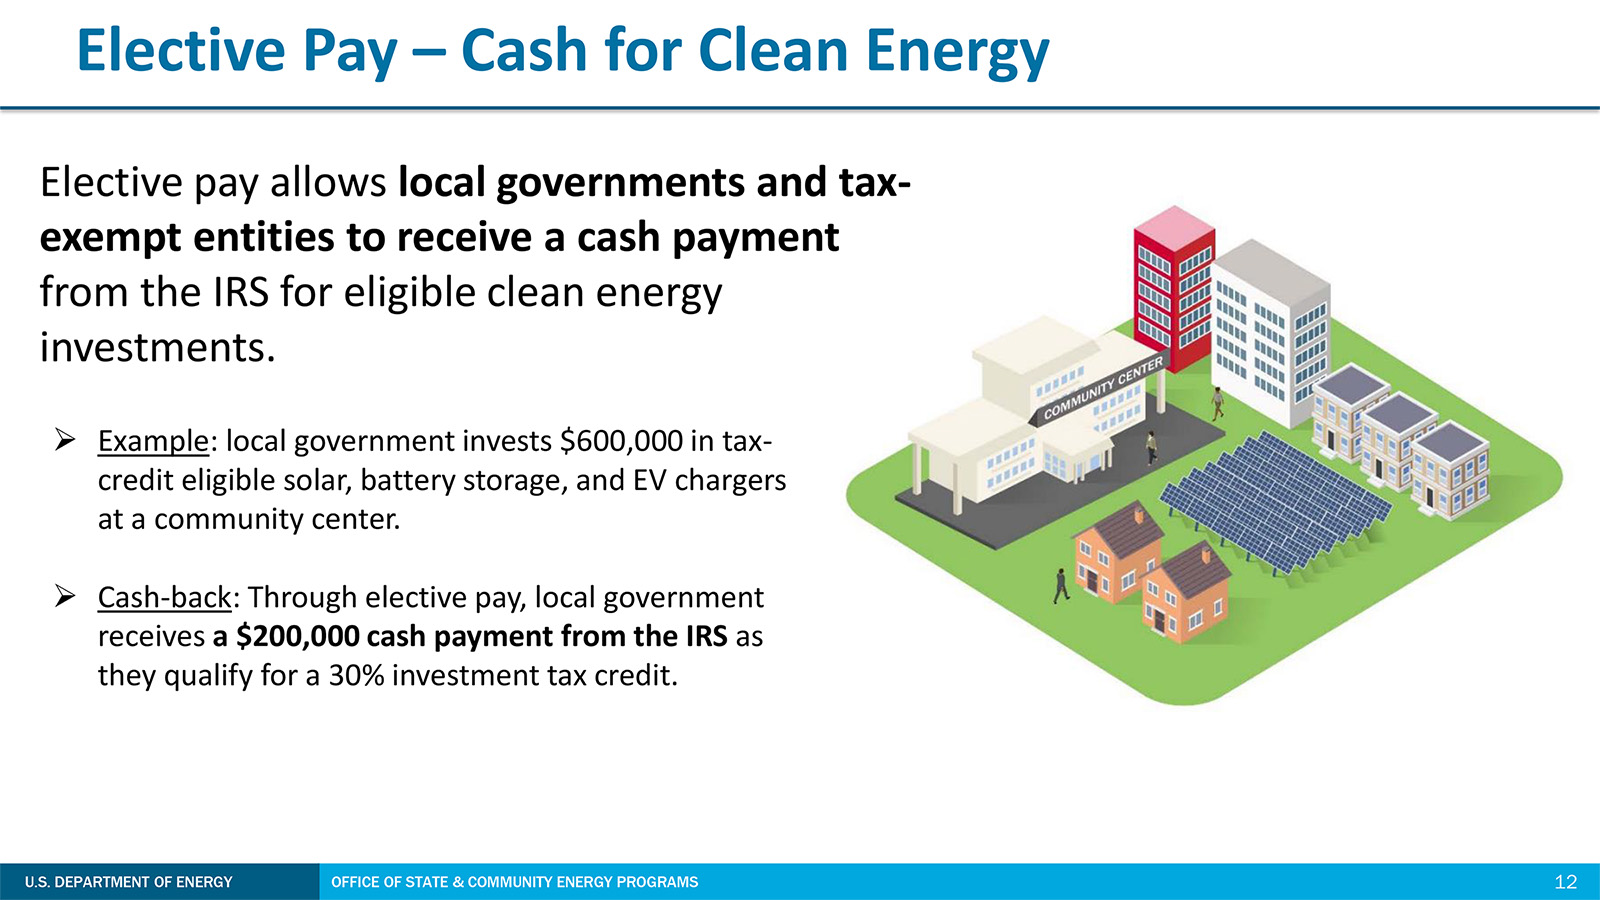 "Elective Pay - Cash for Clean Energy" Courtesy U.S. Dept. of Energy